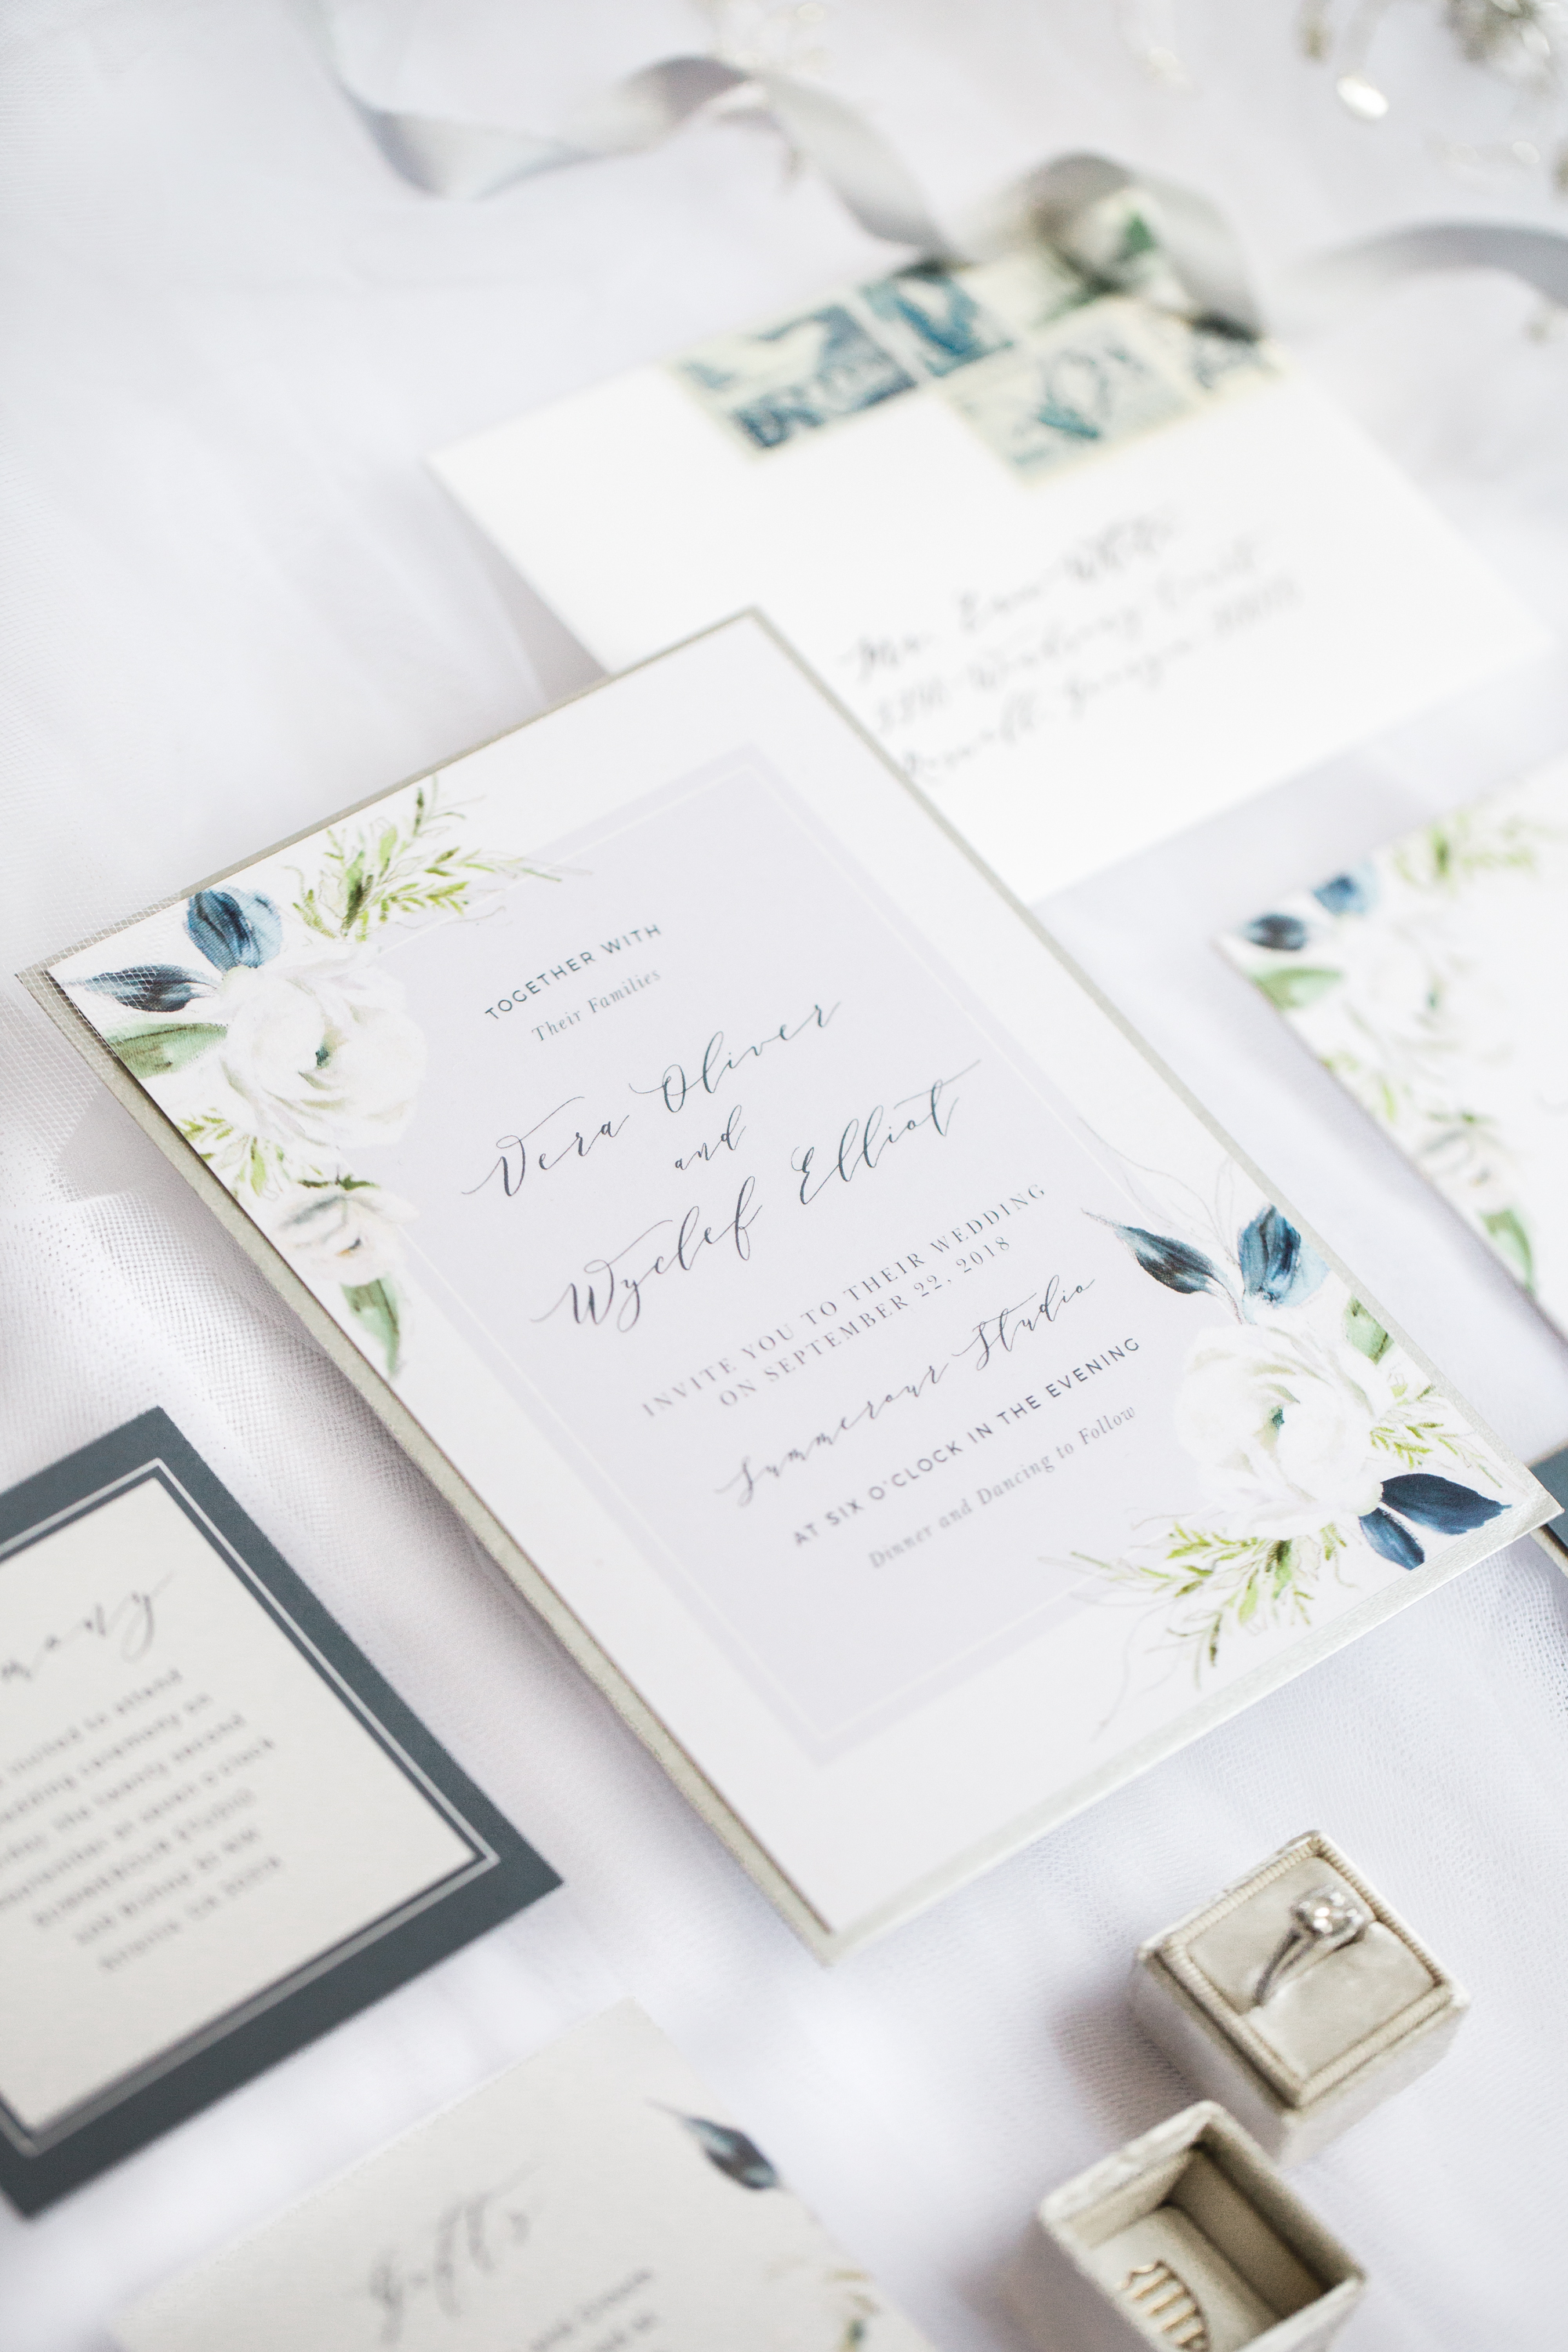 Looking for Invitations that you can design yourself? Basic Invite lets you choose a design and adjust as necessary!